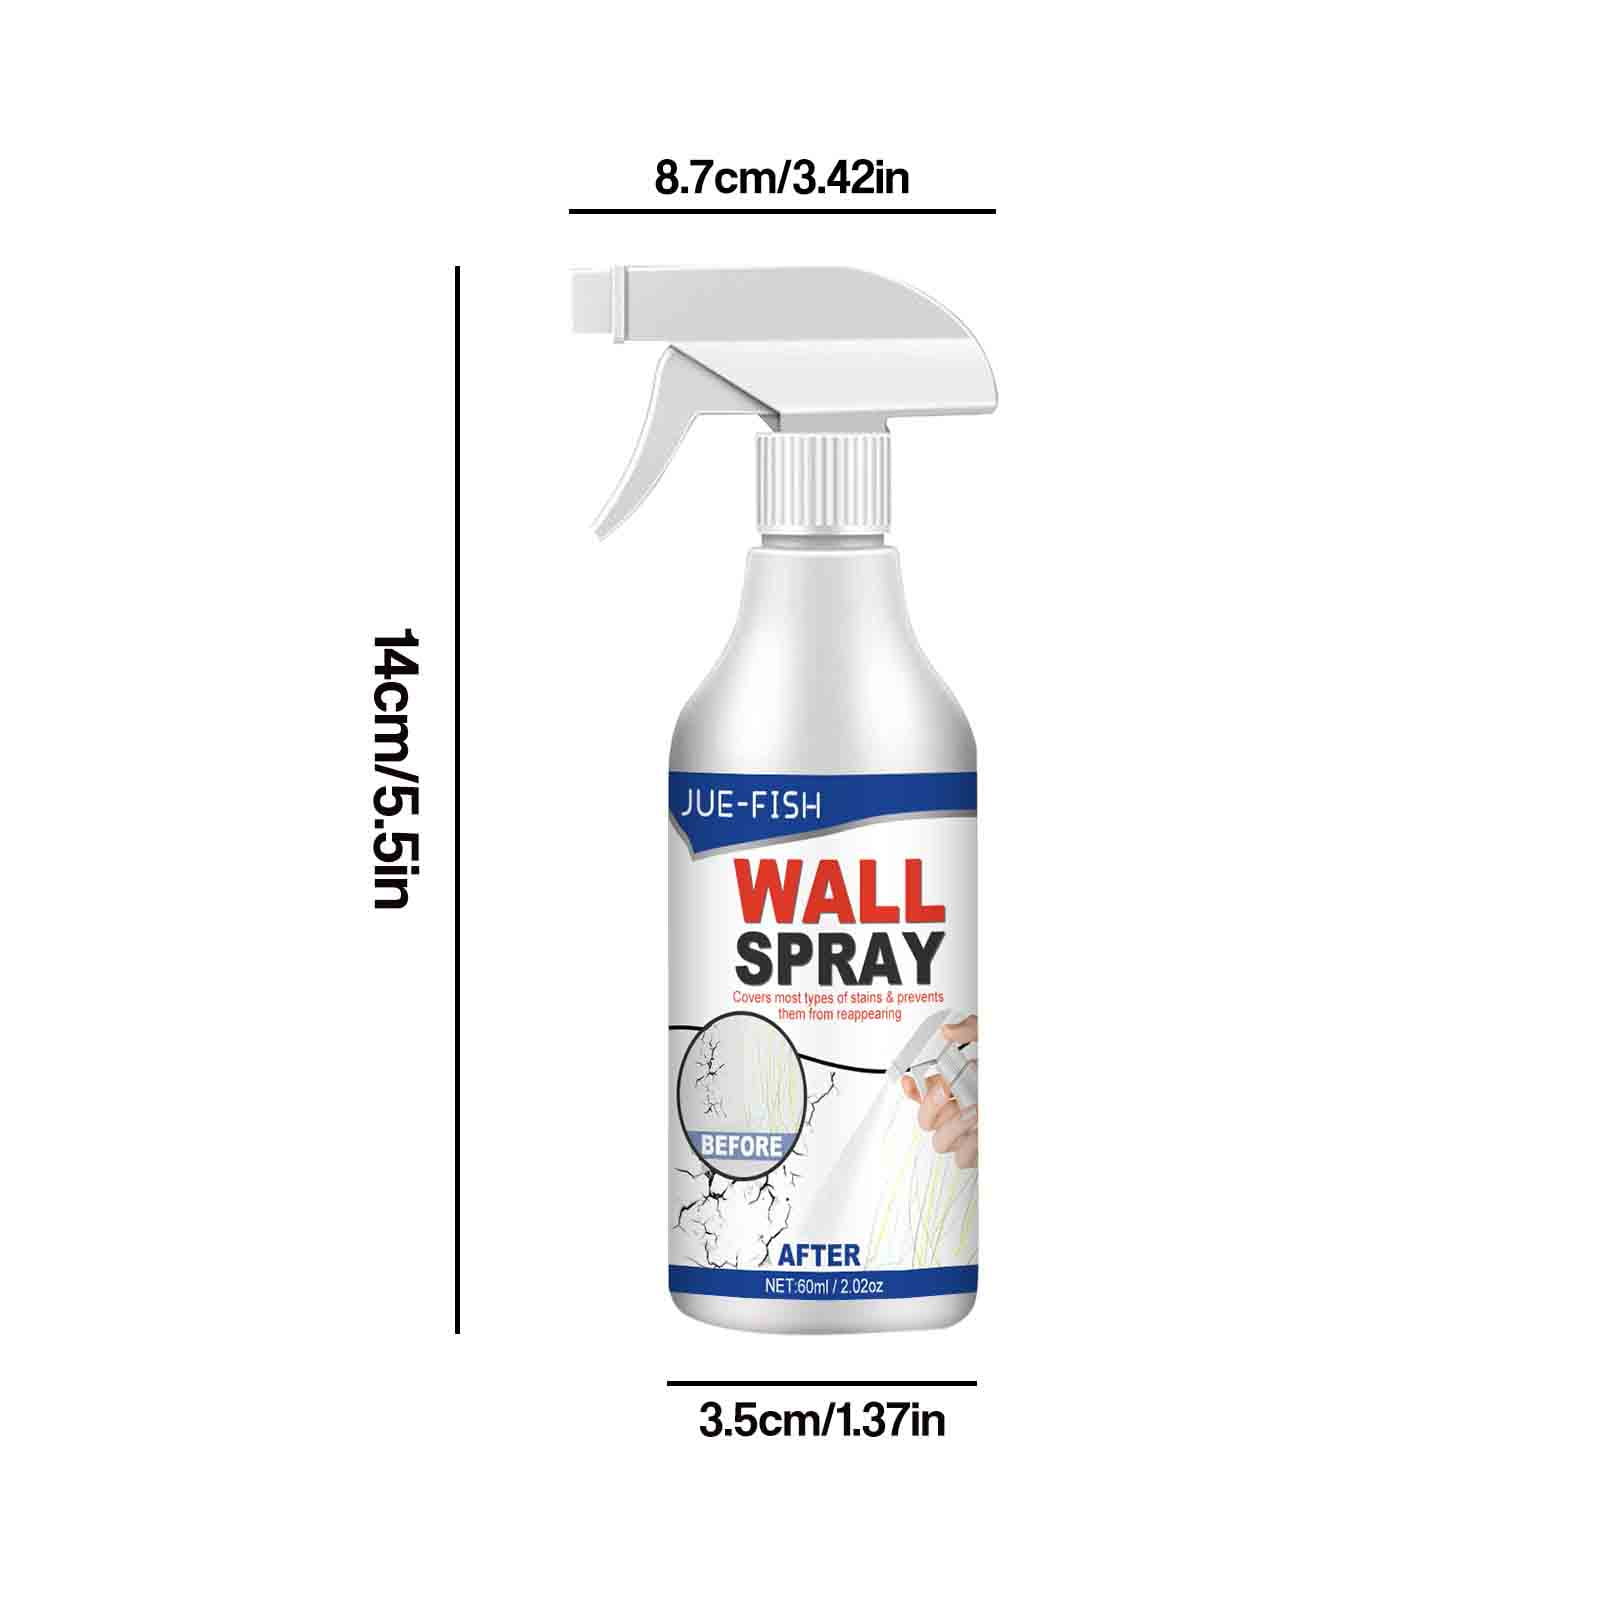 Verny Wall Repair Paint Wall Spray Paint-12oz（Pack of 2) – DWIL PAINT